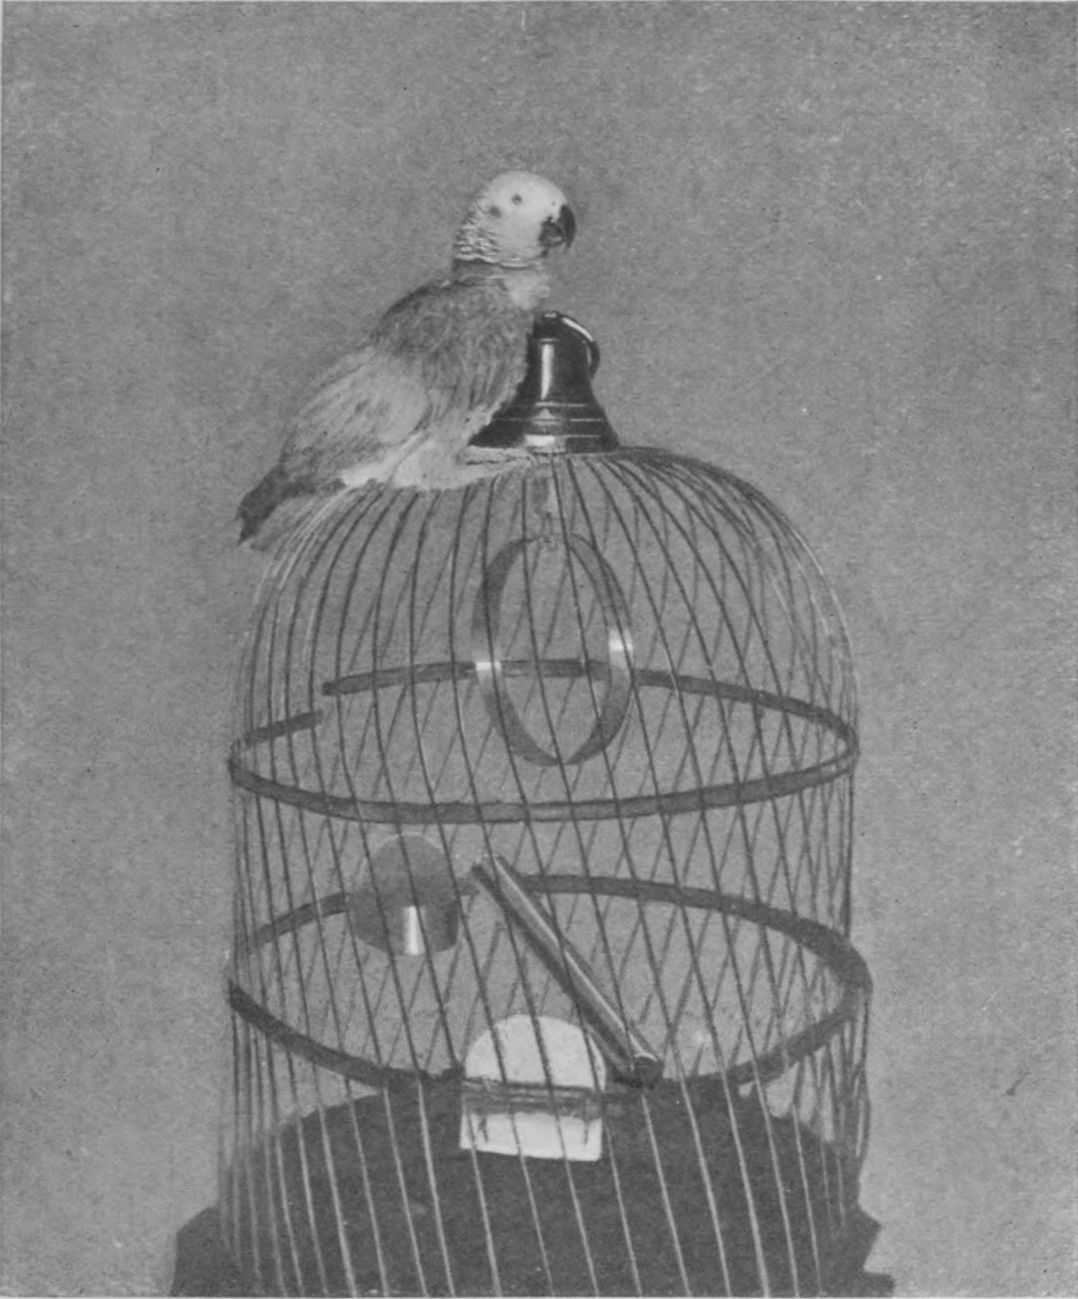 [Photograph of bird on outside of cage]